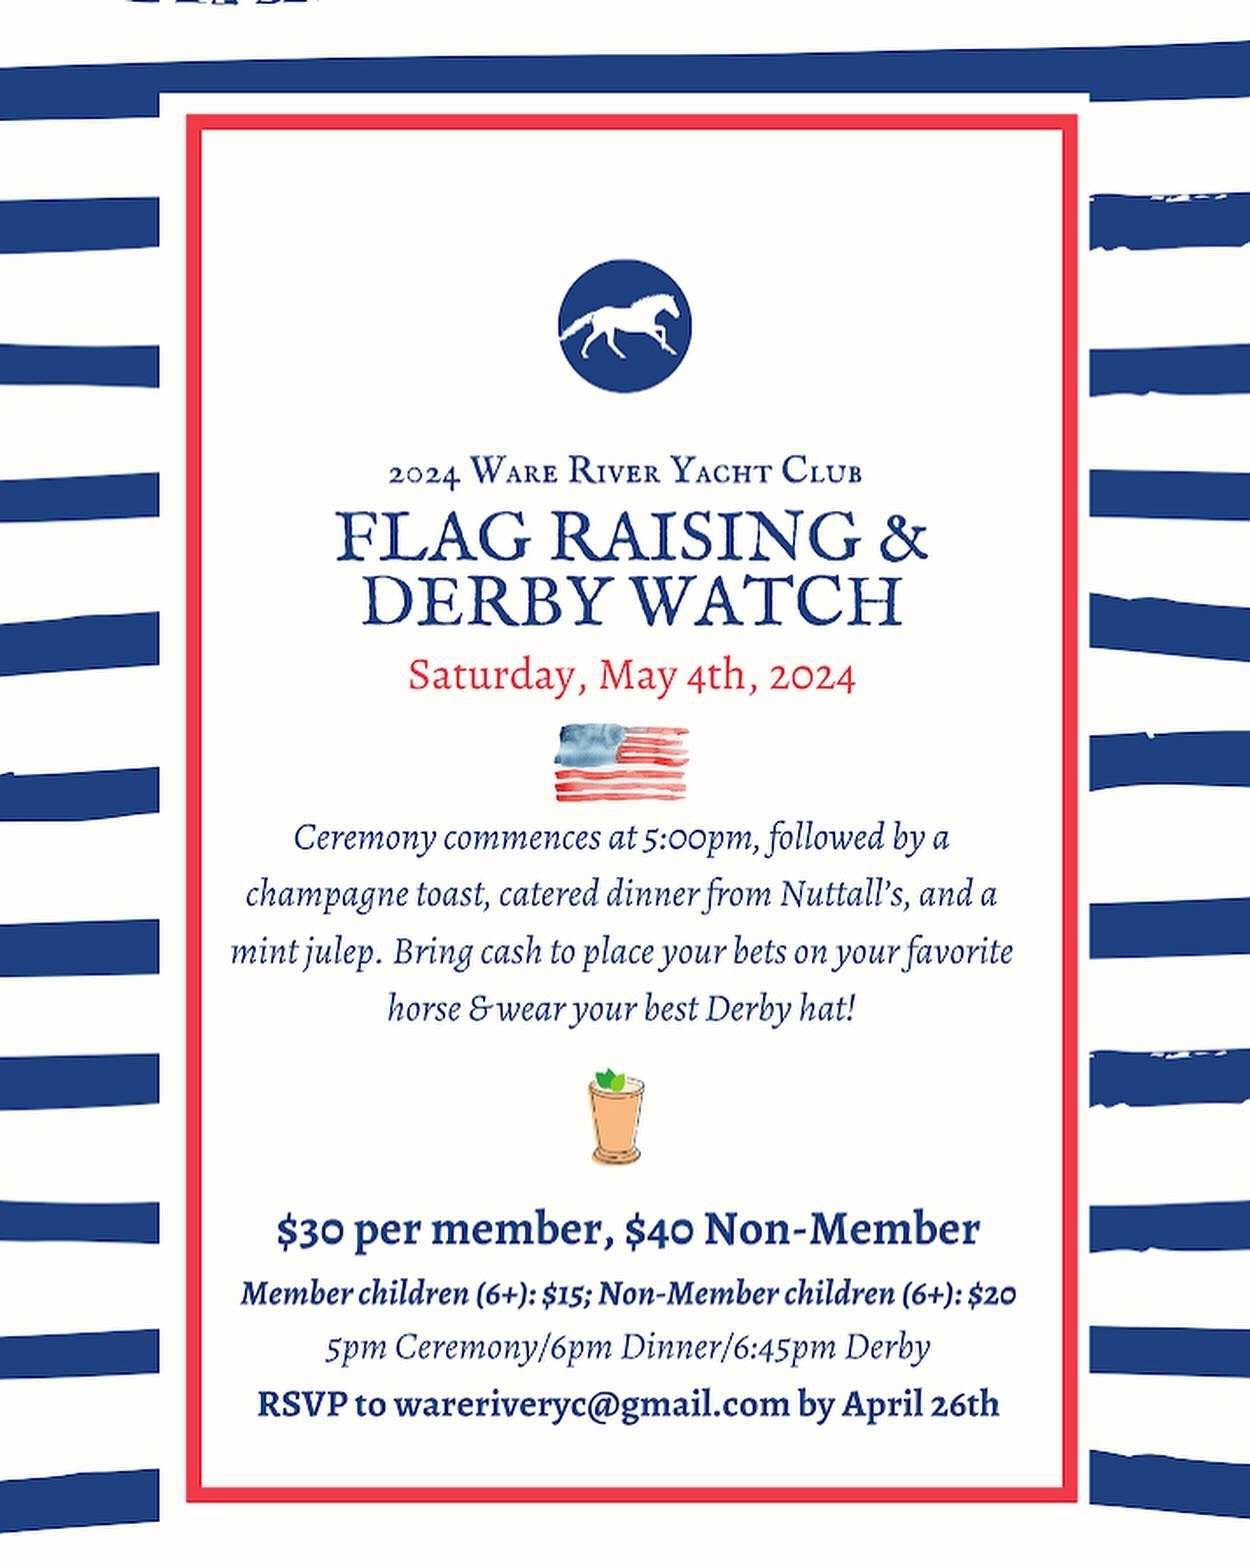 Our annual Flag Raising and Derby Day is approaching soon&mdash;get those RSVPs in so we can start the summer sailing season! ⛵️☀️🇺🇸🏇